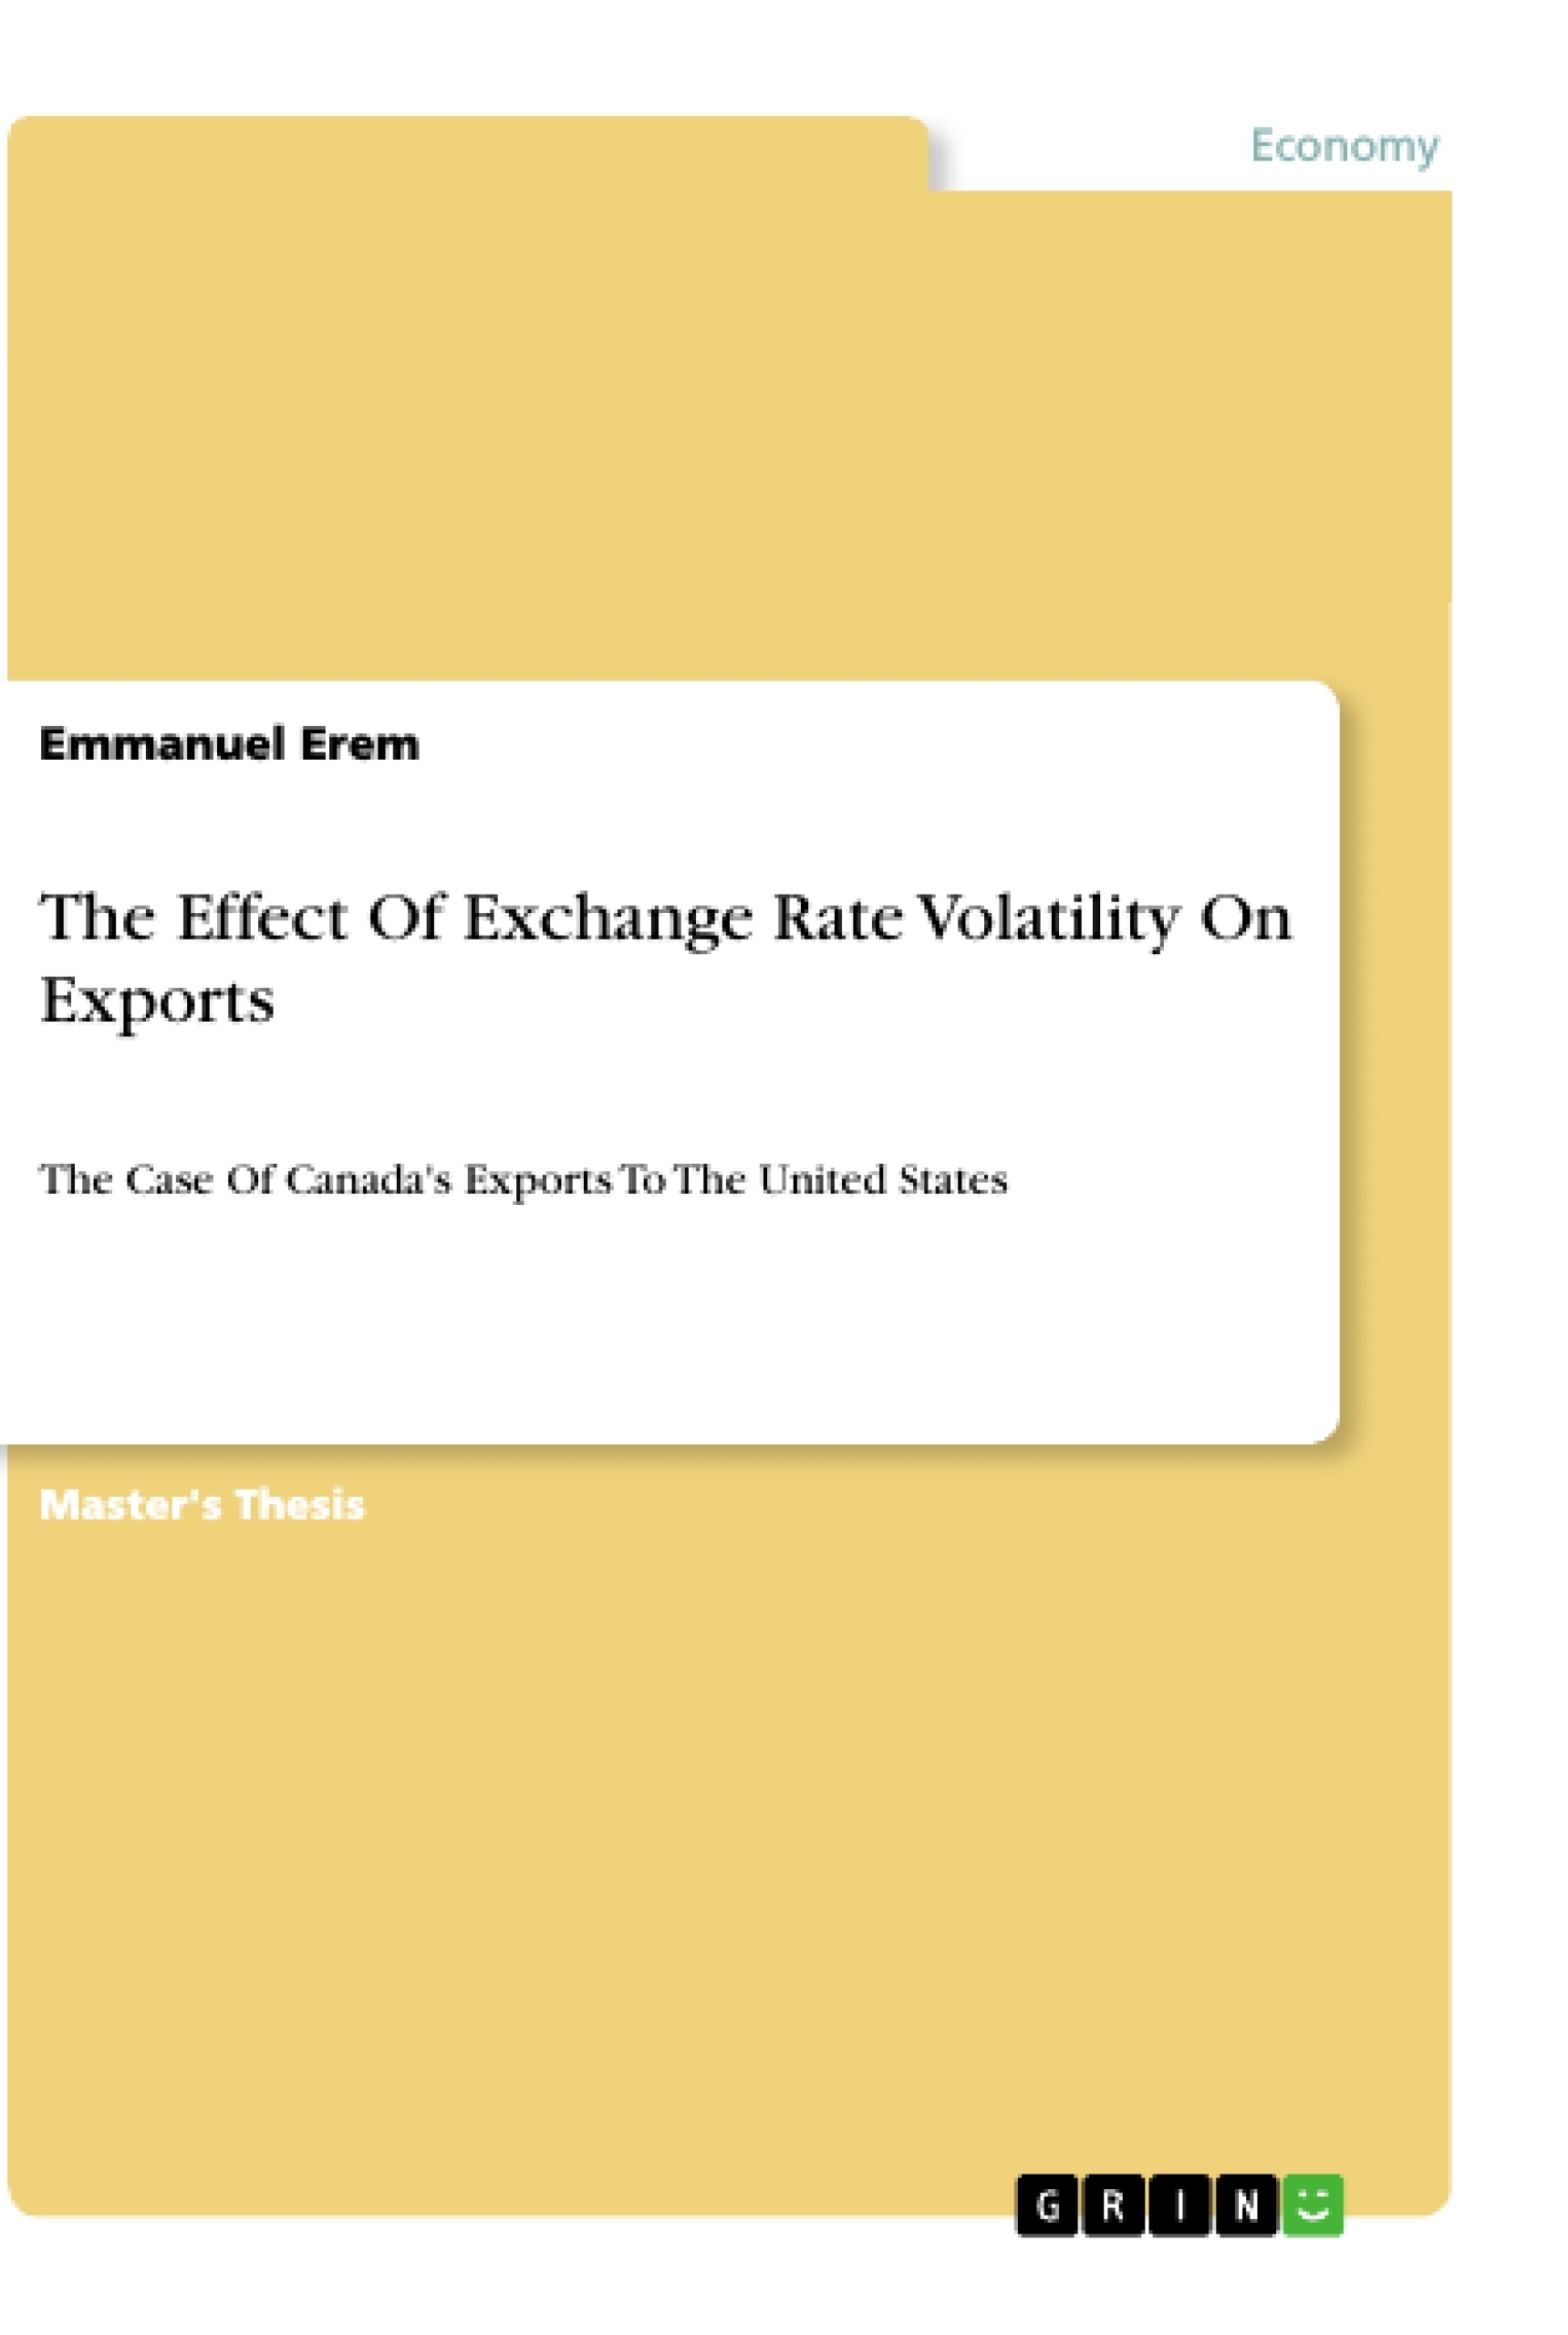 Title: The Effect Of Exchange Rate Volatility On Exports